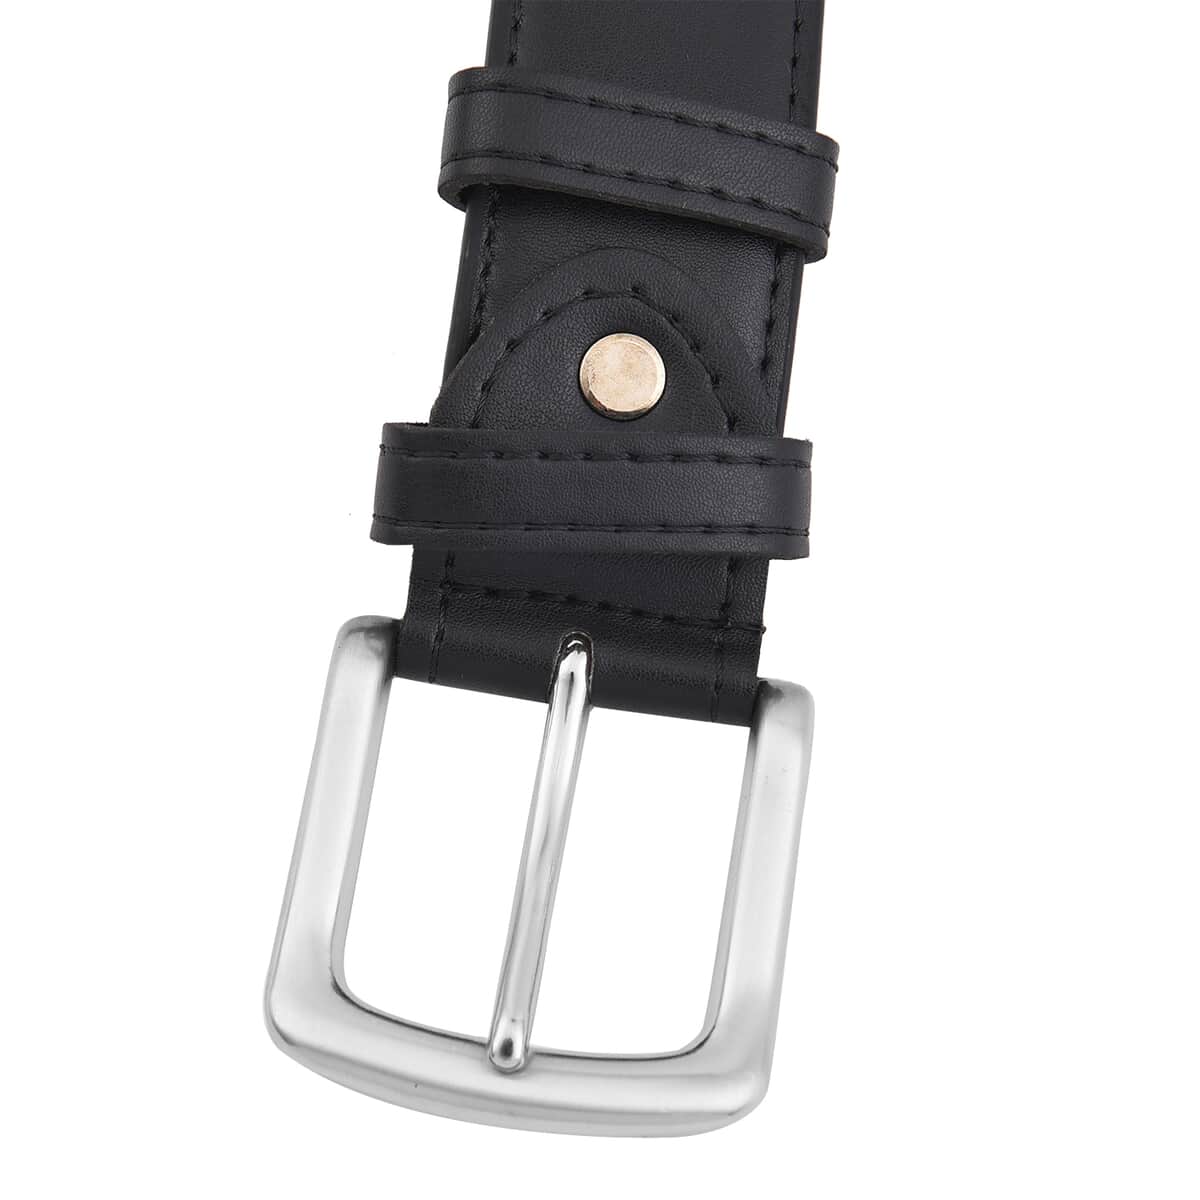 2-in-1 Black Wallet Faux Leather Belt with Hidden Zipper Pocket - L (47-49 Inches) image number 5